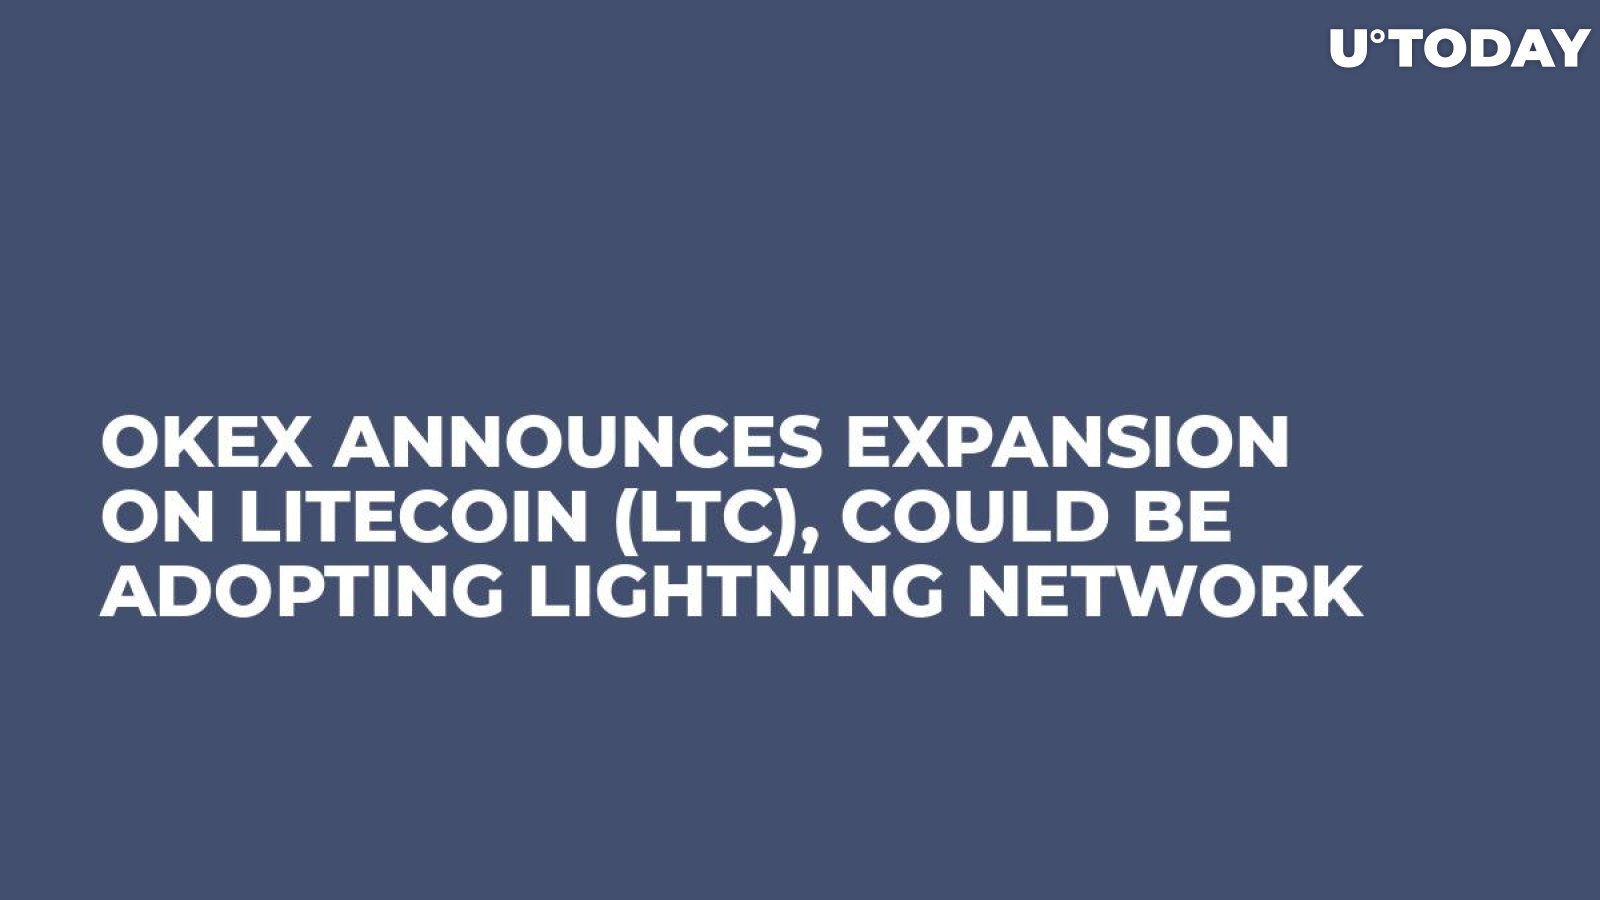 OKEx Announces Expansion on Litecoin (LTC), Could Be Adopting Lightning Network